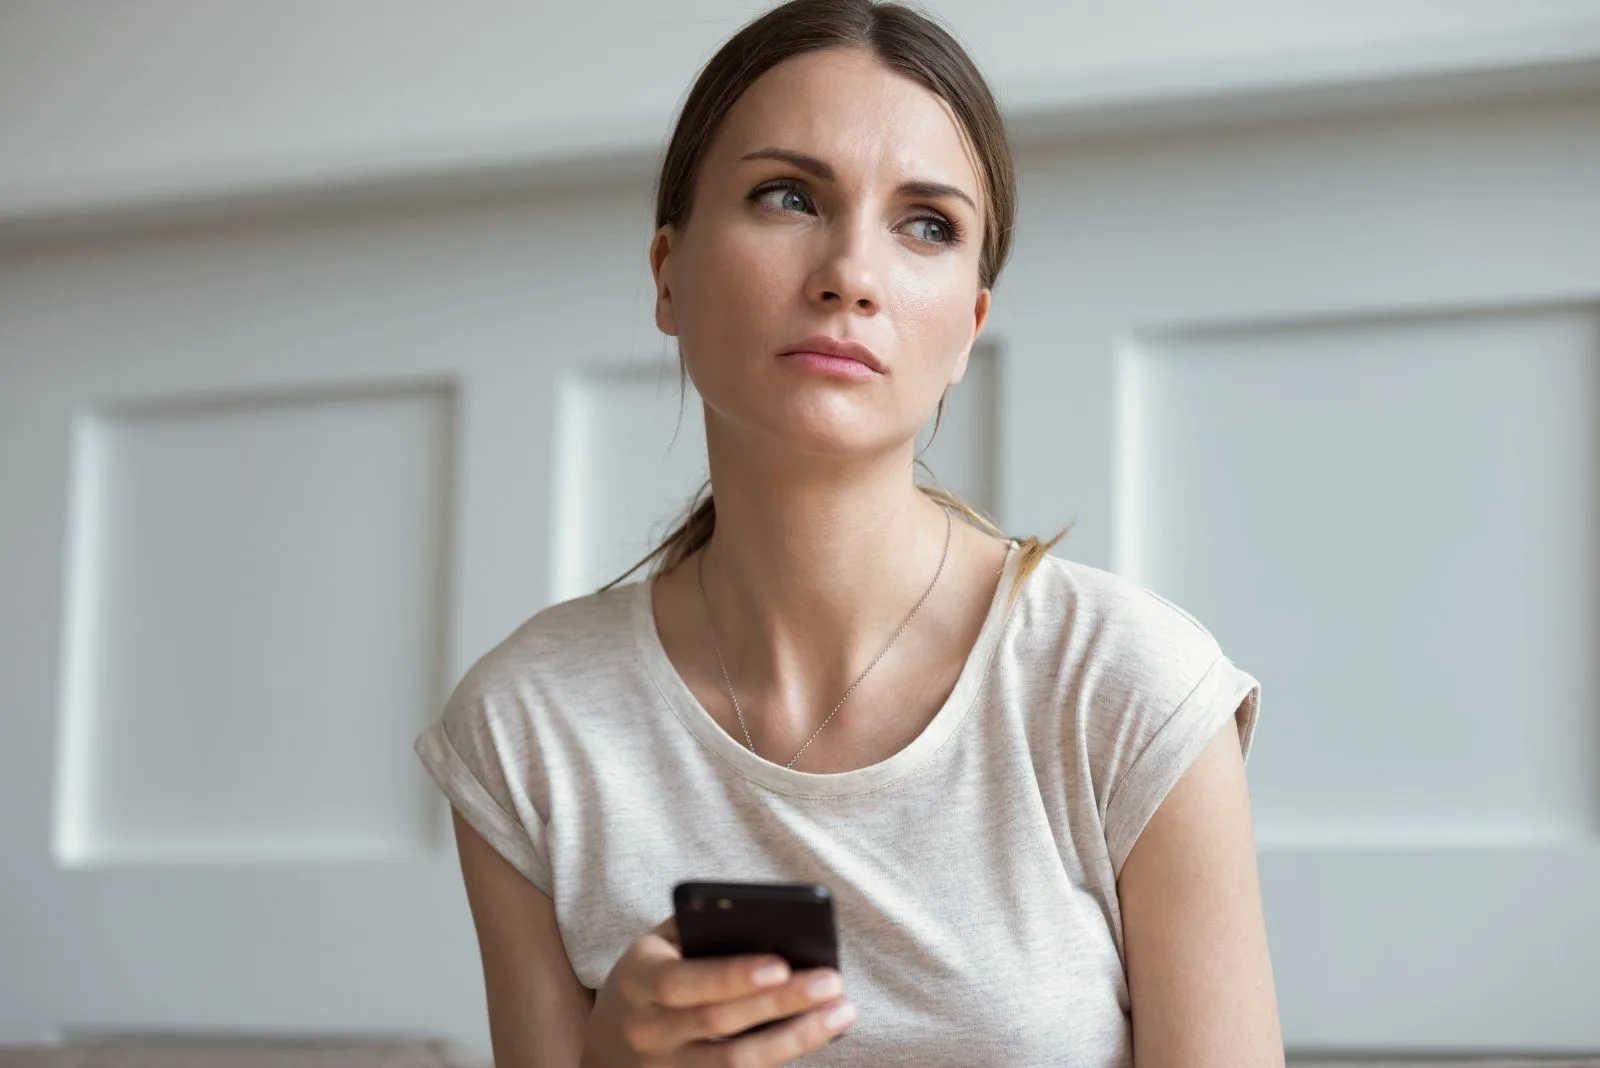 pensive woman texting on smartphone inside home